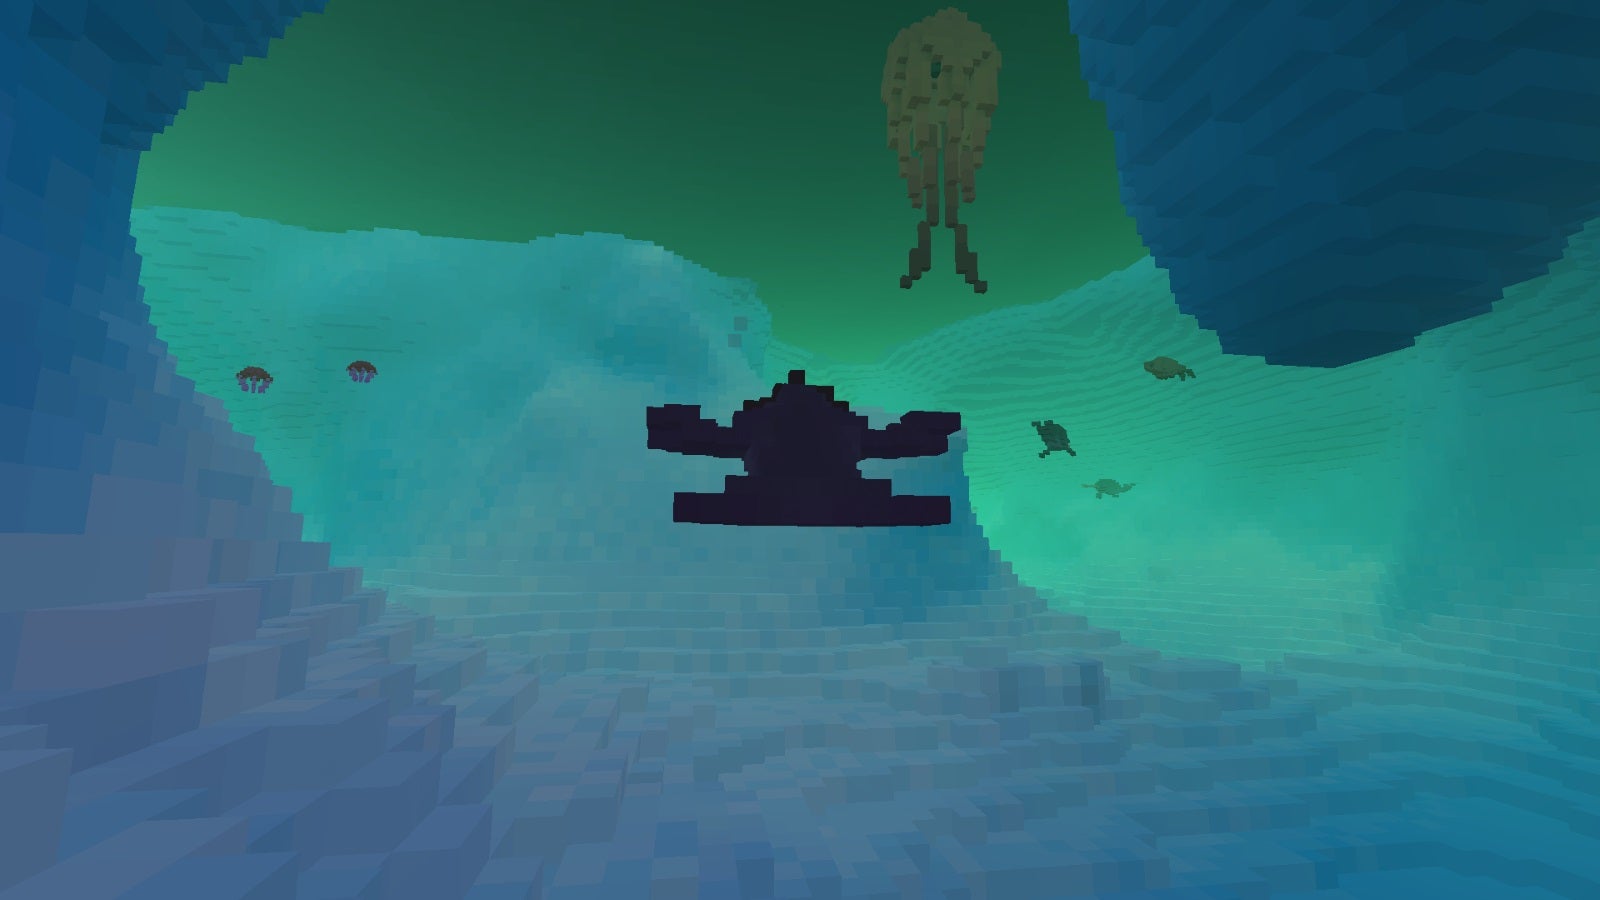 Image for Fugl expands beyond the skies and deep into the waters below